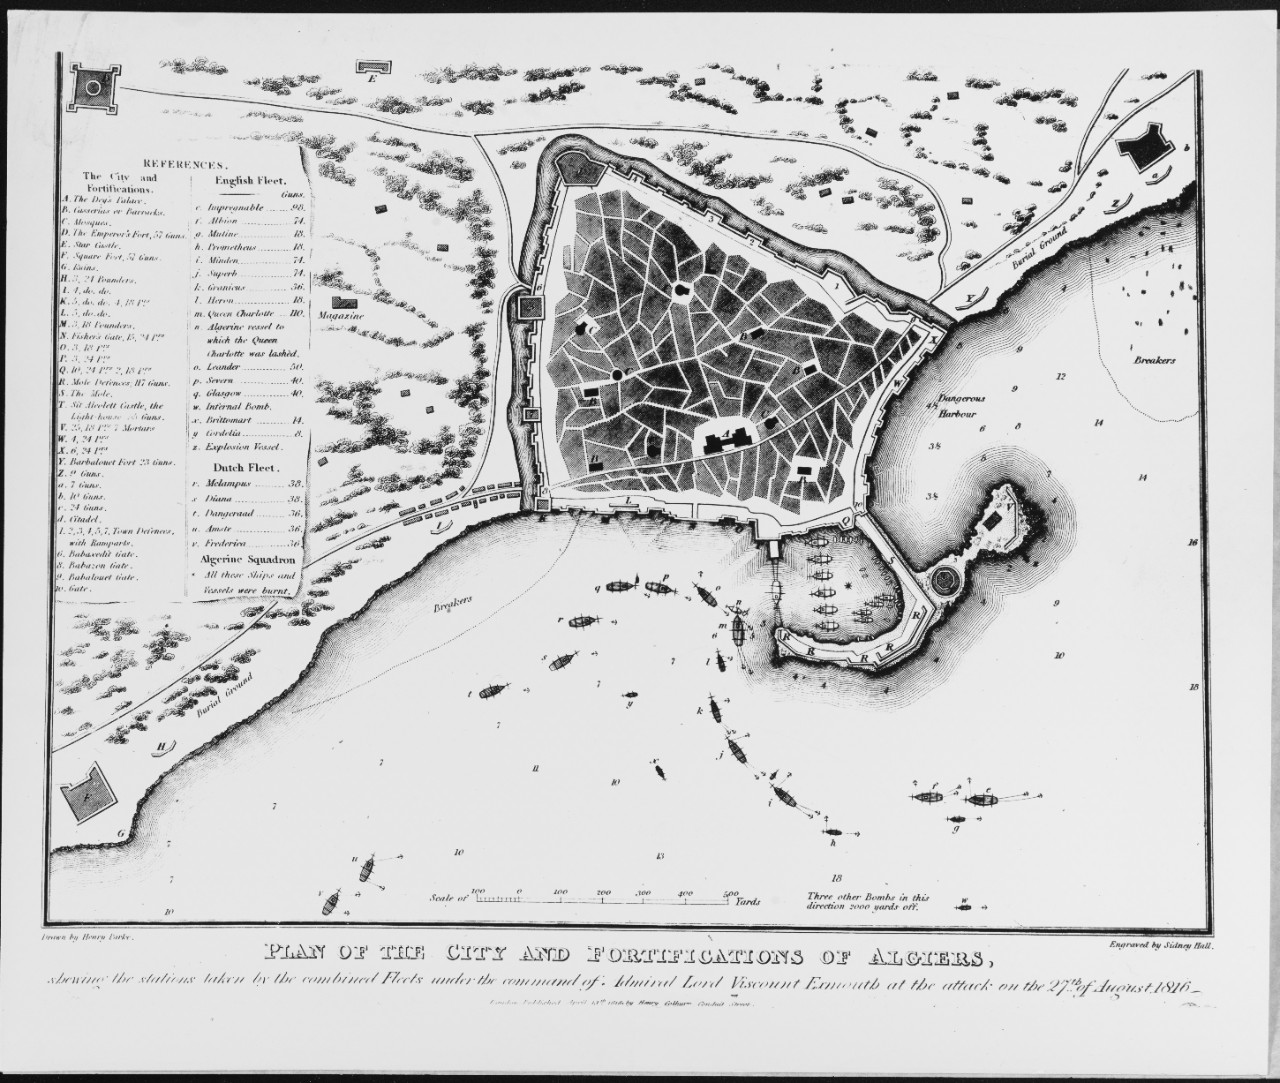 Plan of the City and Fortifications of Algiers,  Admiral Lord Viscount Ermouth at the attack on the 27th of August 1816